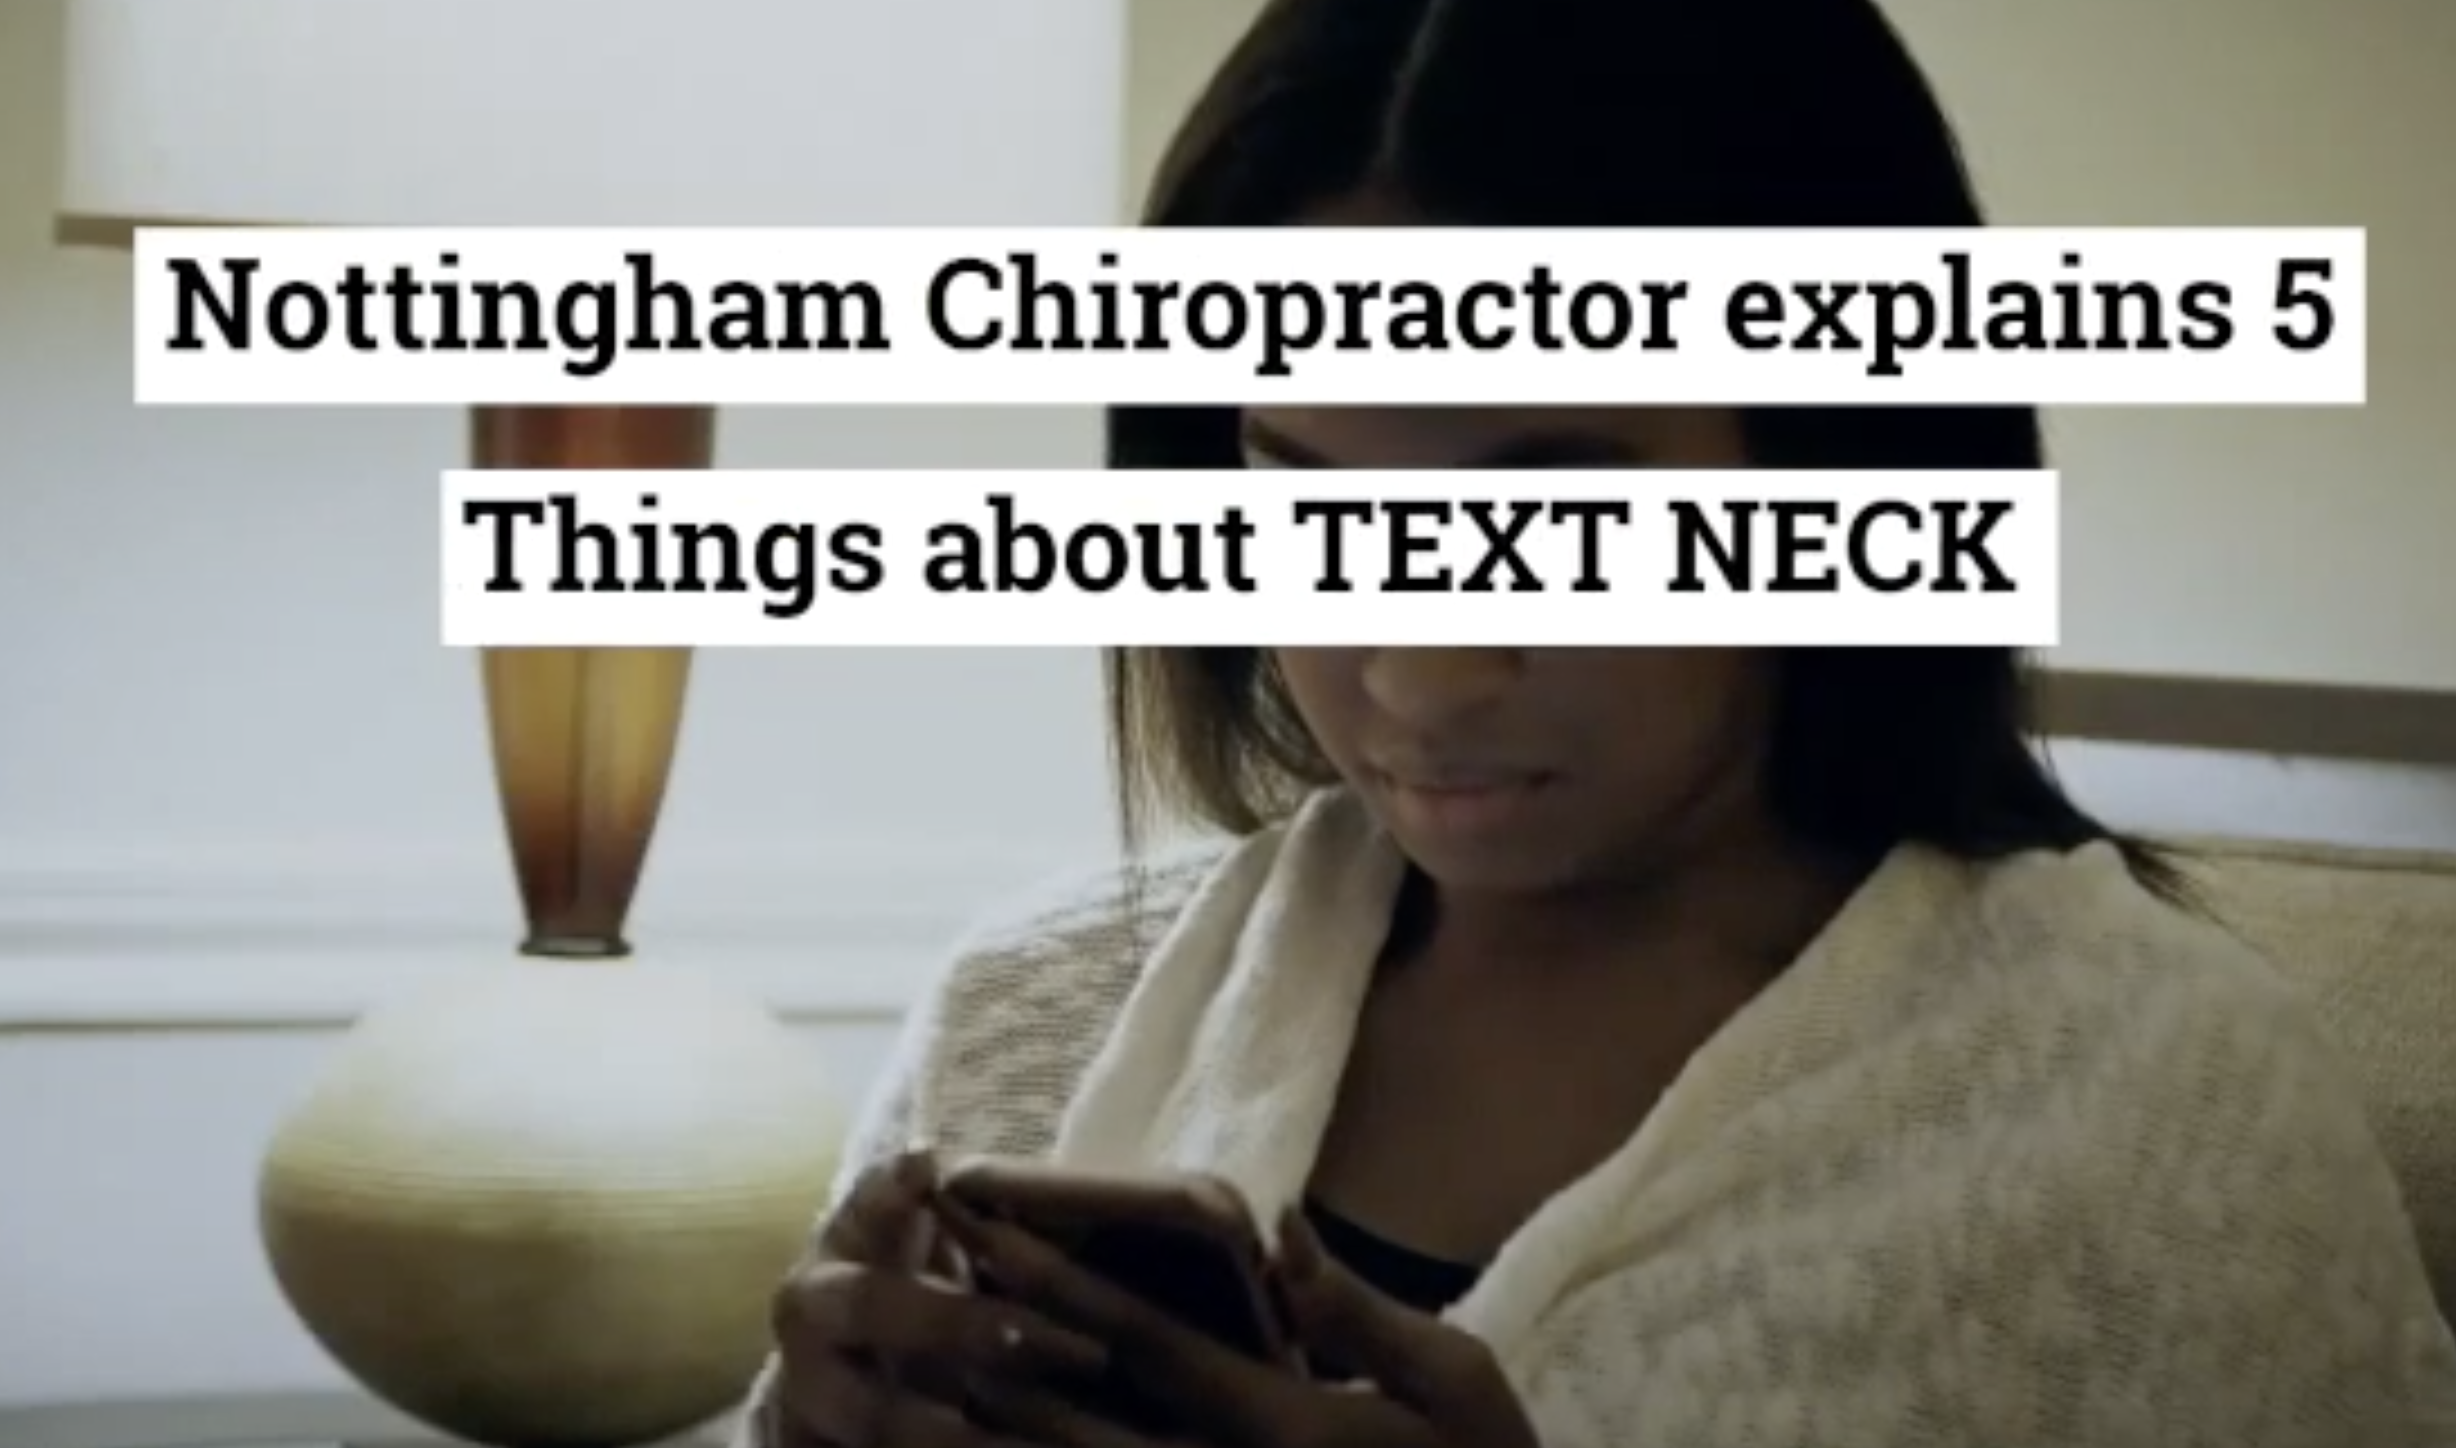 Nottingham Chiropractor Explains 5 Things About TEXT NECK